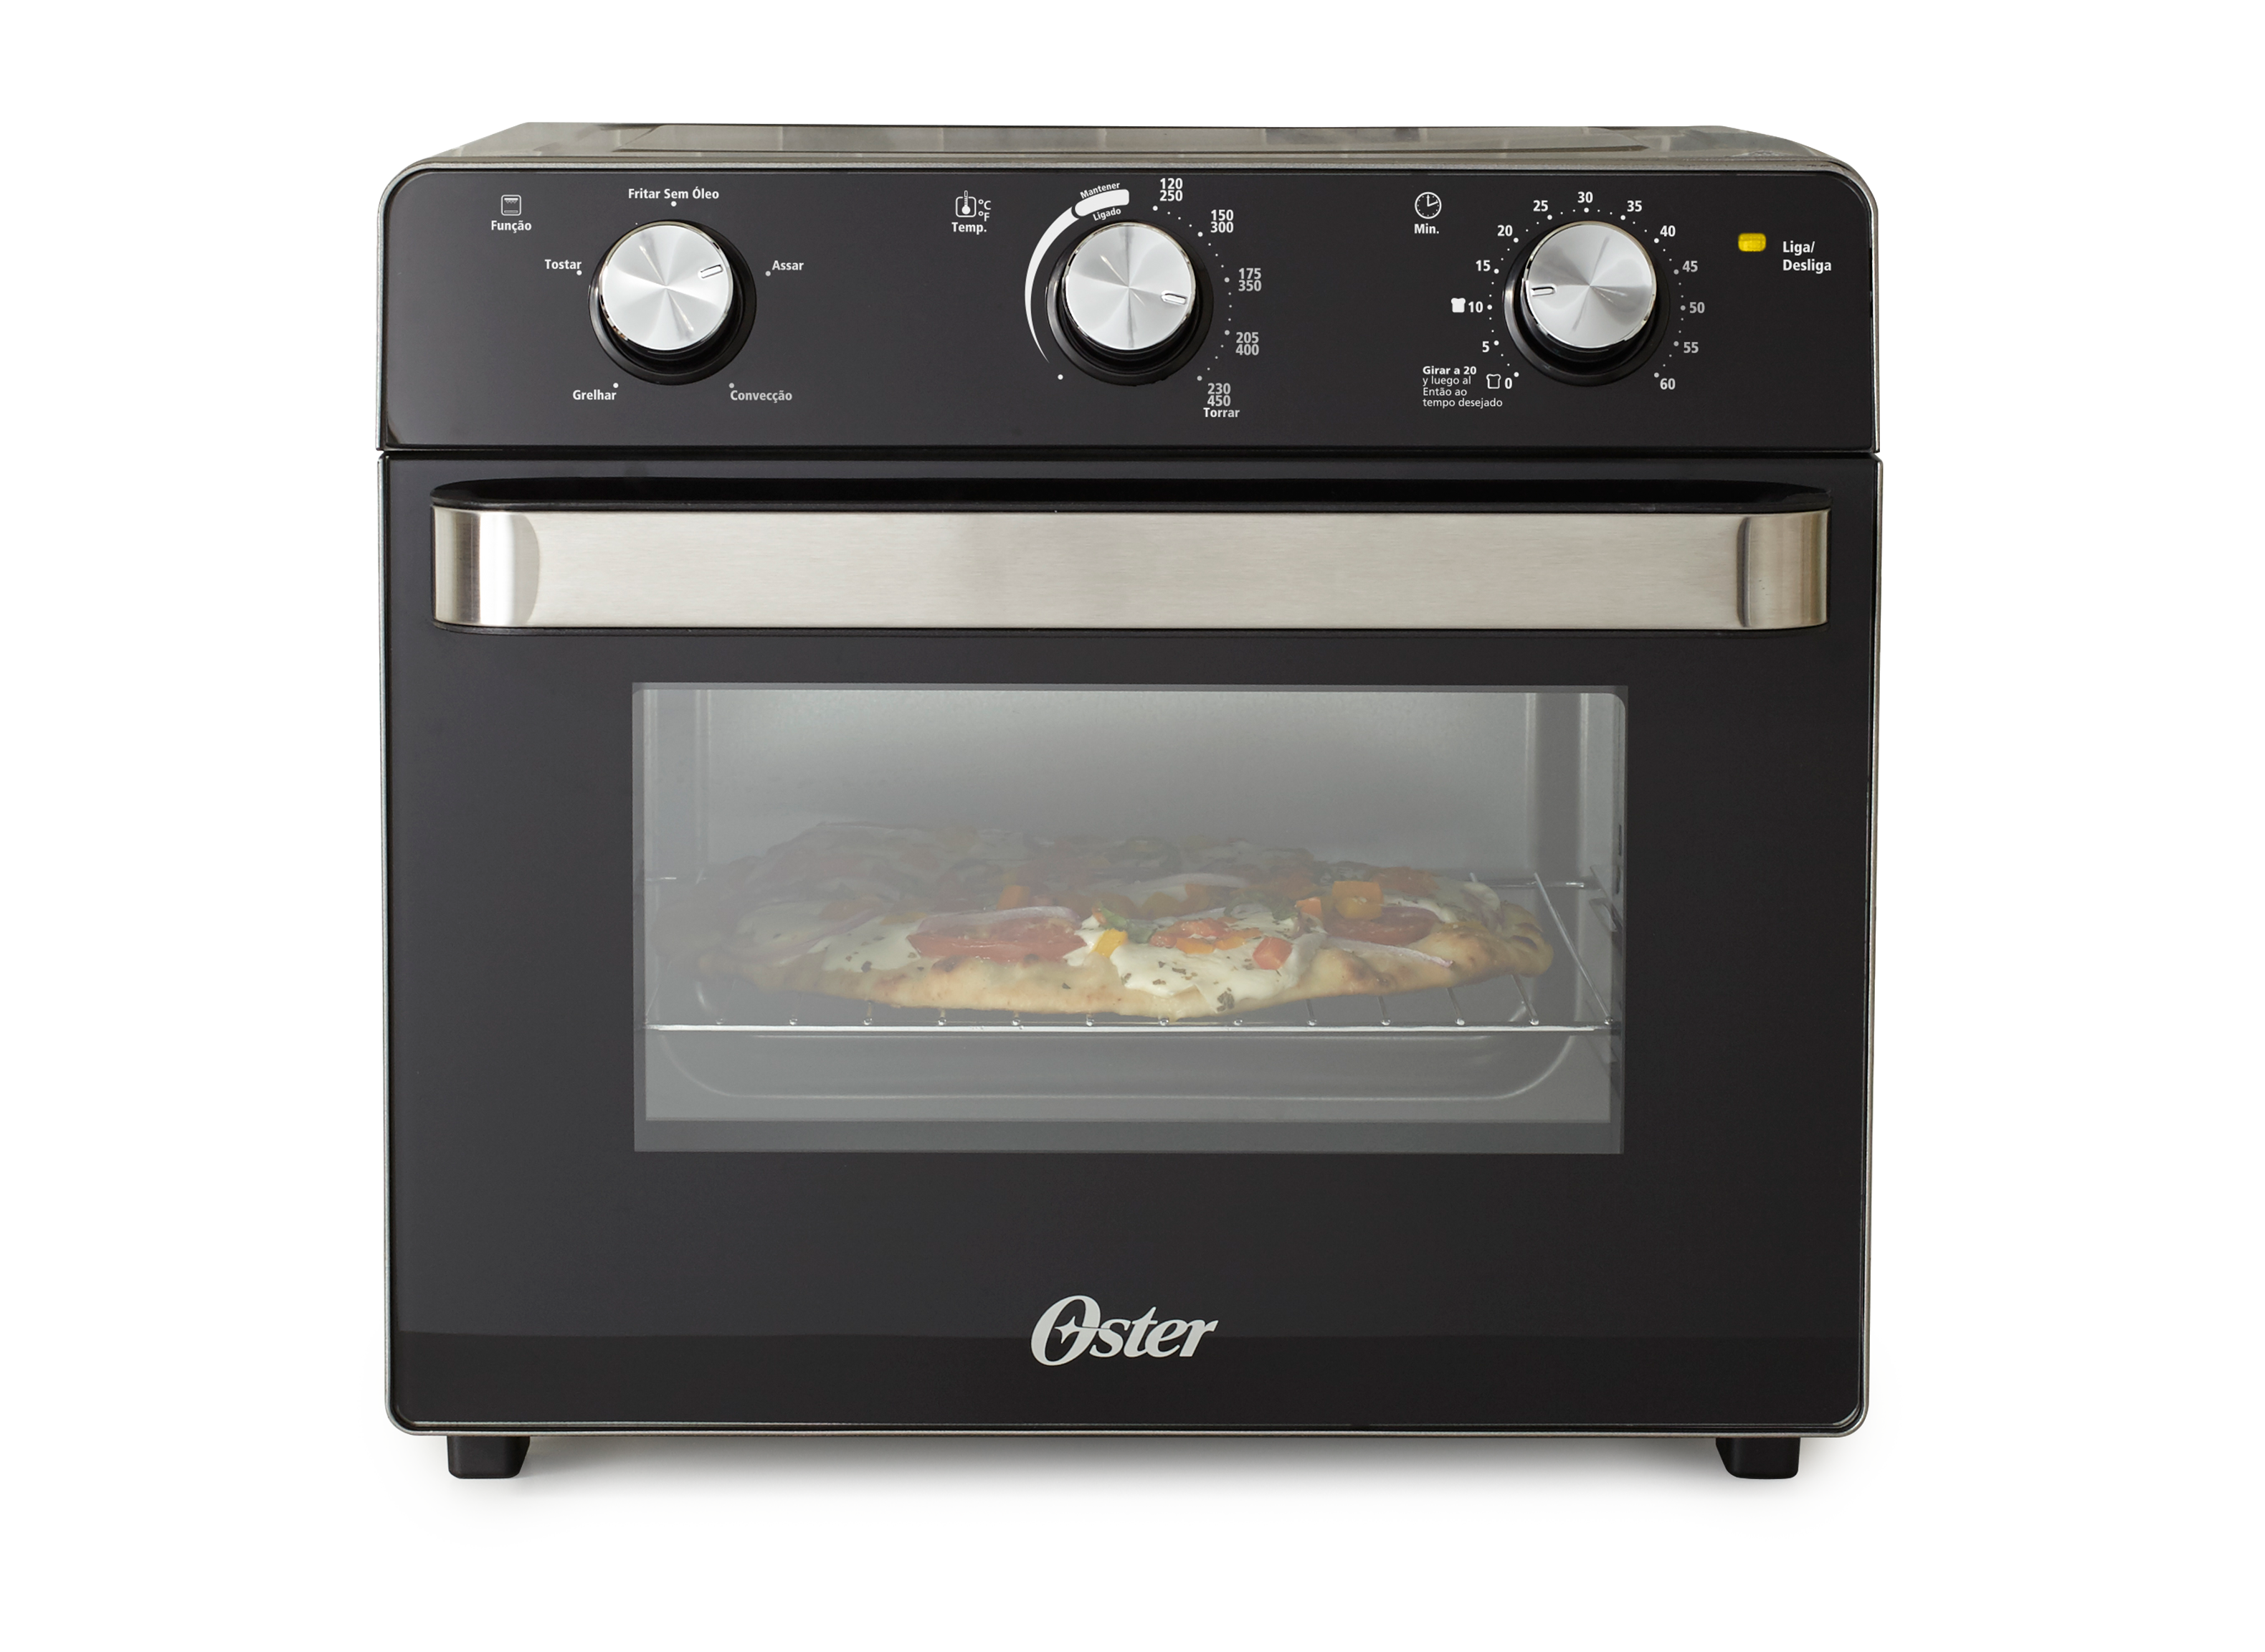 https://crdms.images.consumerreports.org/prod/products/cr/models/401041-toaster-ovens-oster-countertop-toaster-oven-with-air-fryer-tssttvmaf1-10012277.png